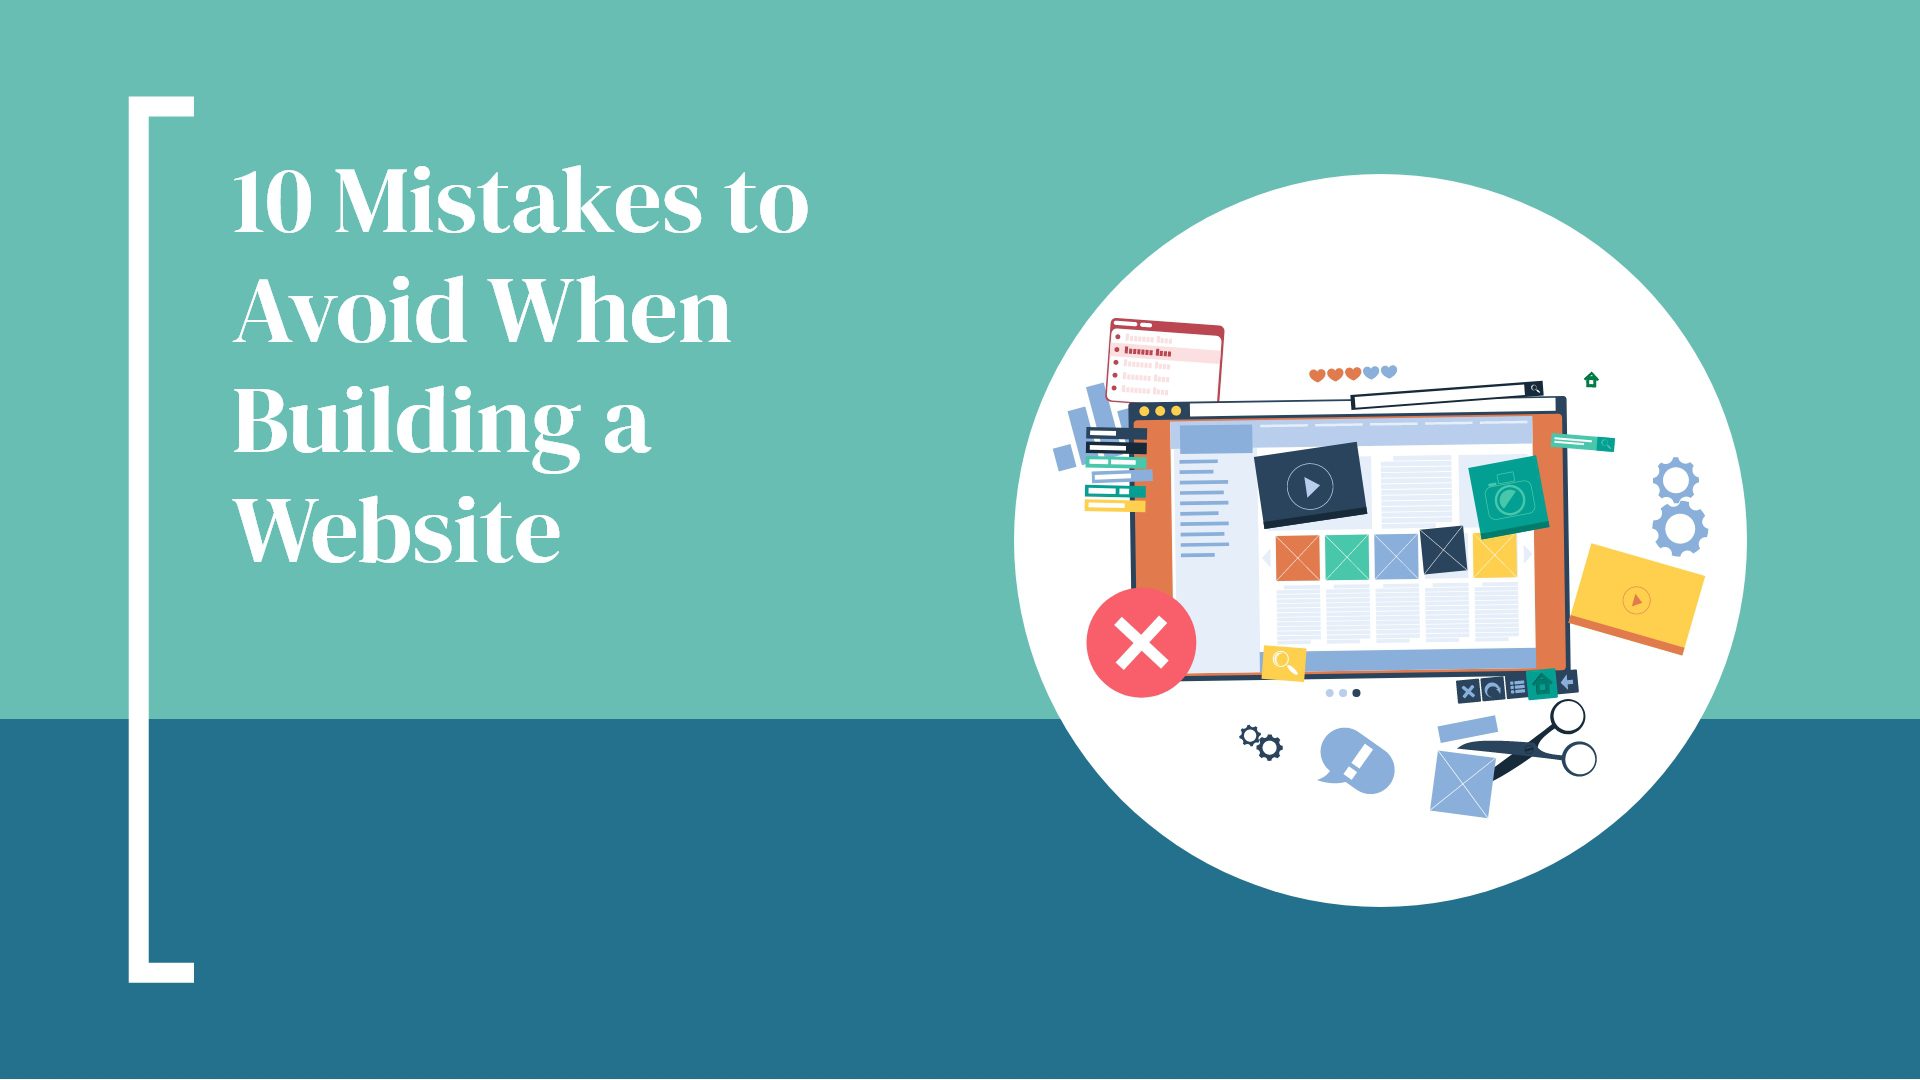 10 Mistakes to Avoid When Building a Website